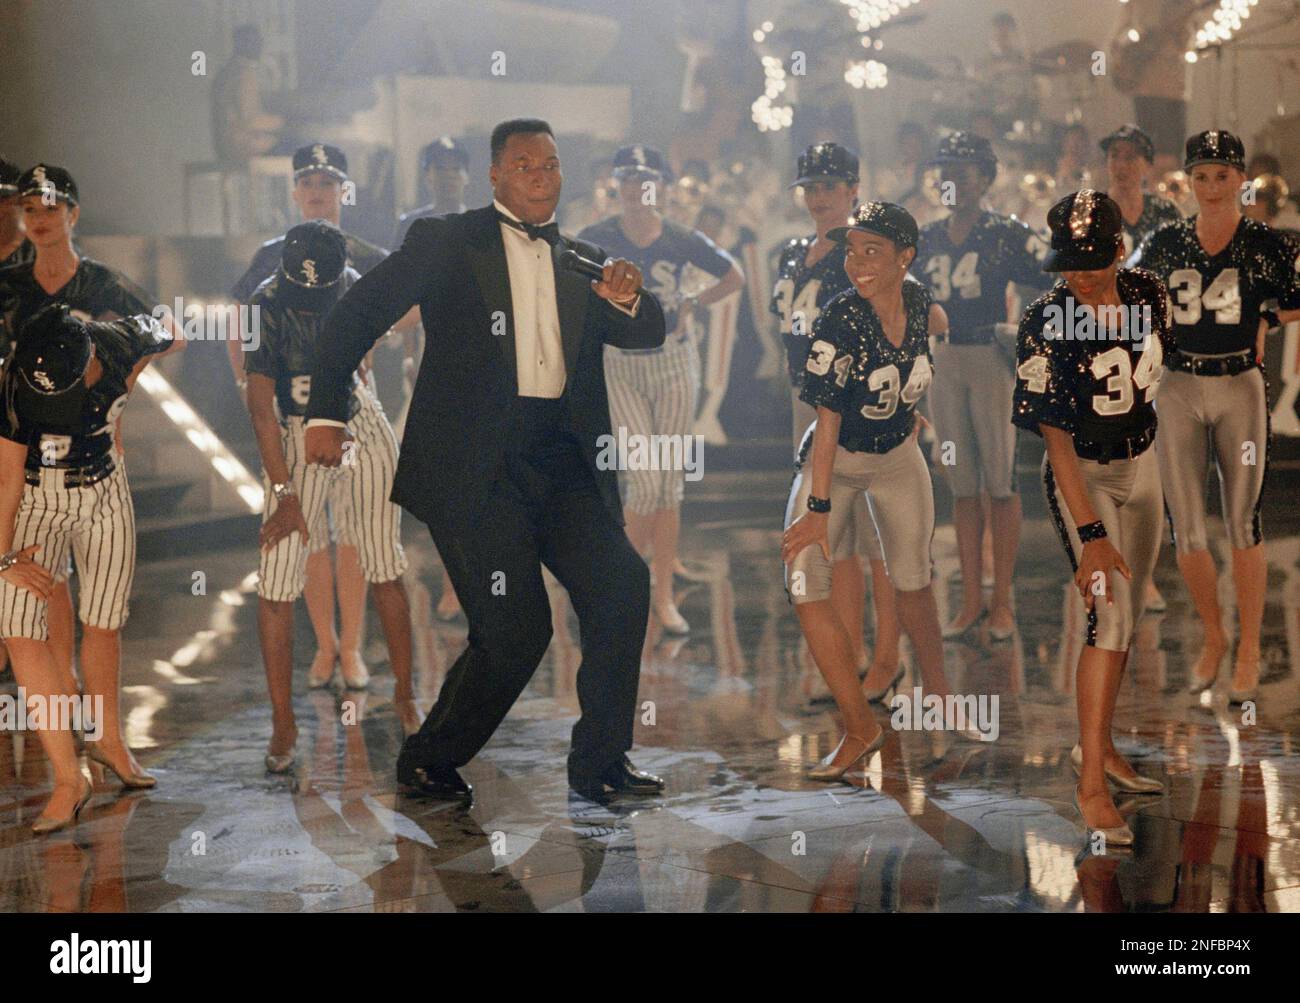 Bo Jackson dances during the taping of a Nike commercial in Culver